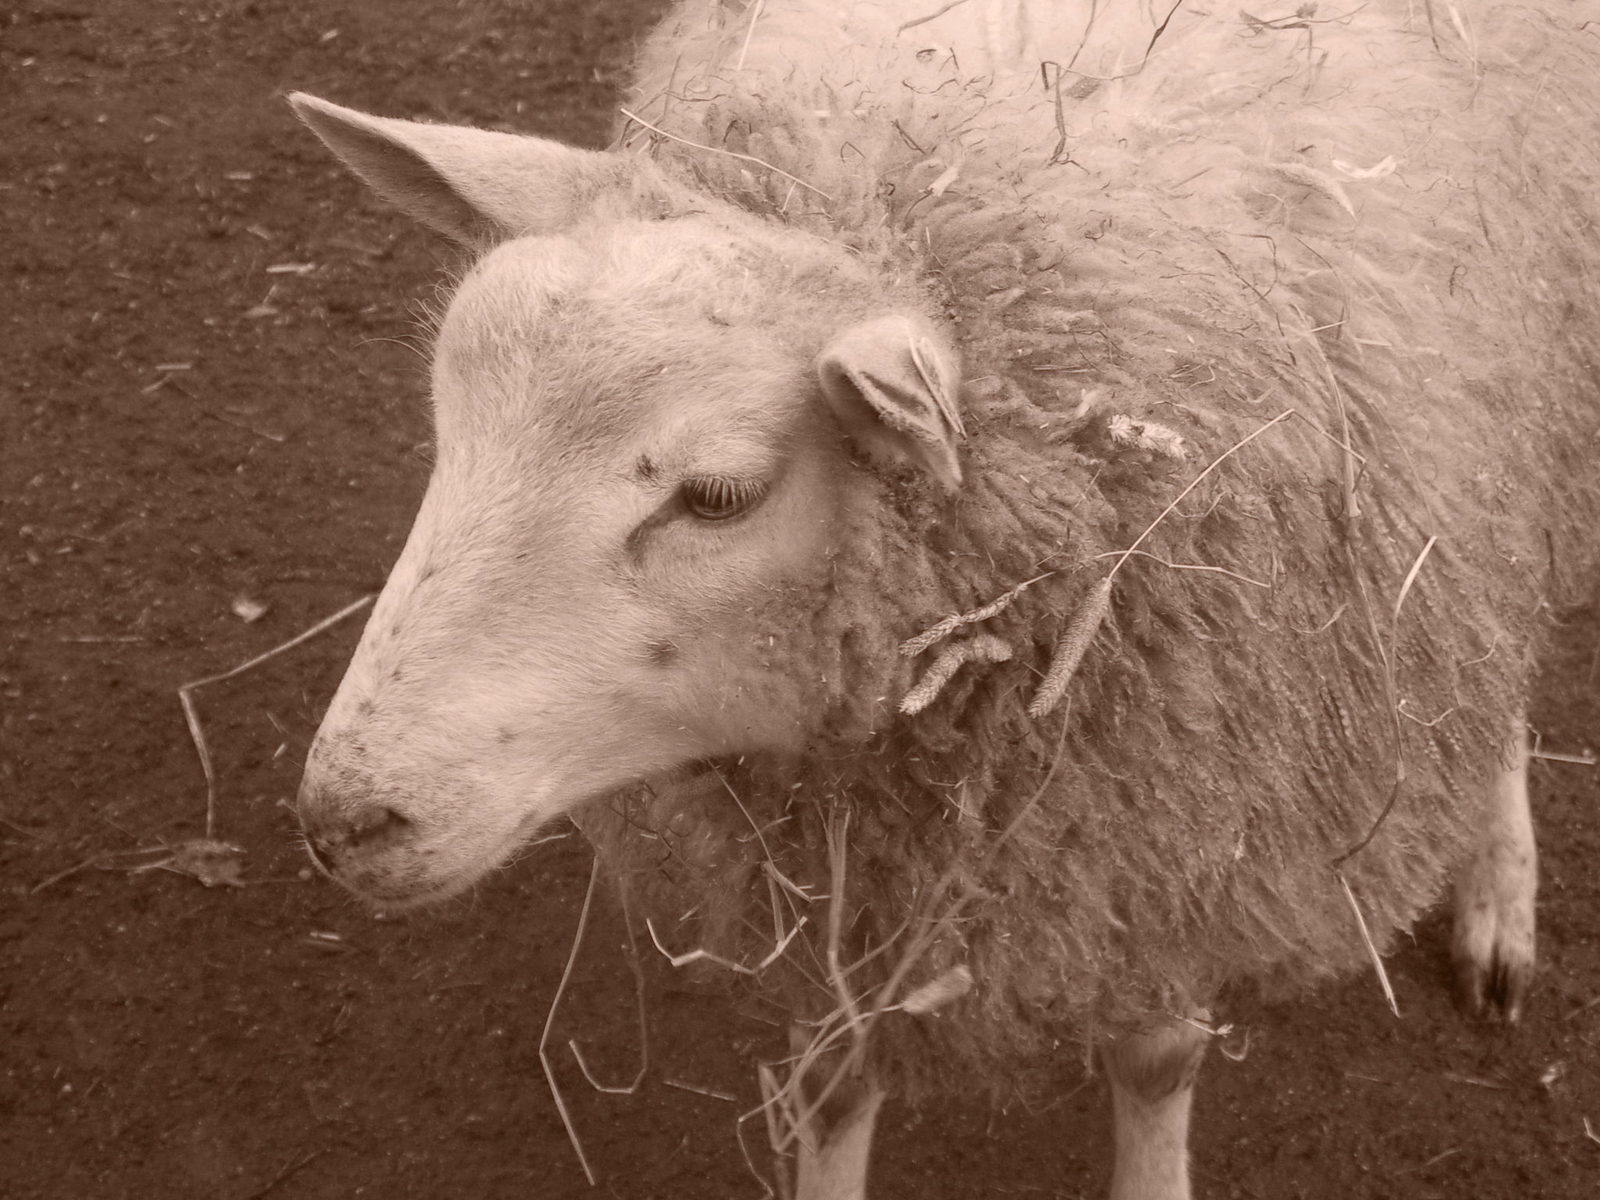 a close up view of a sheep with hay in its mouth